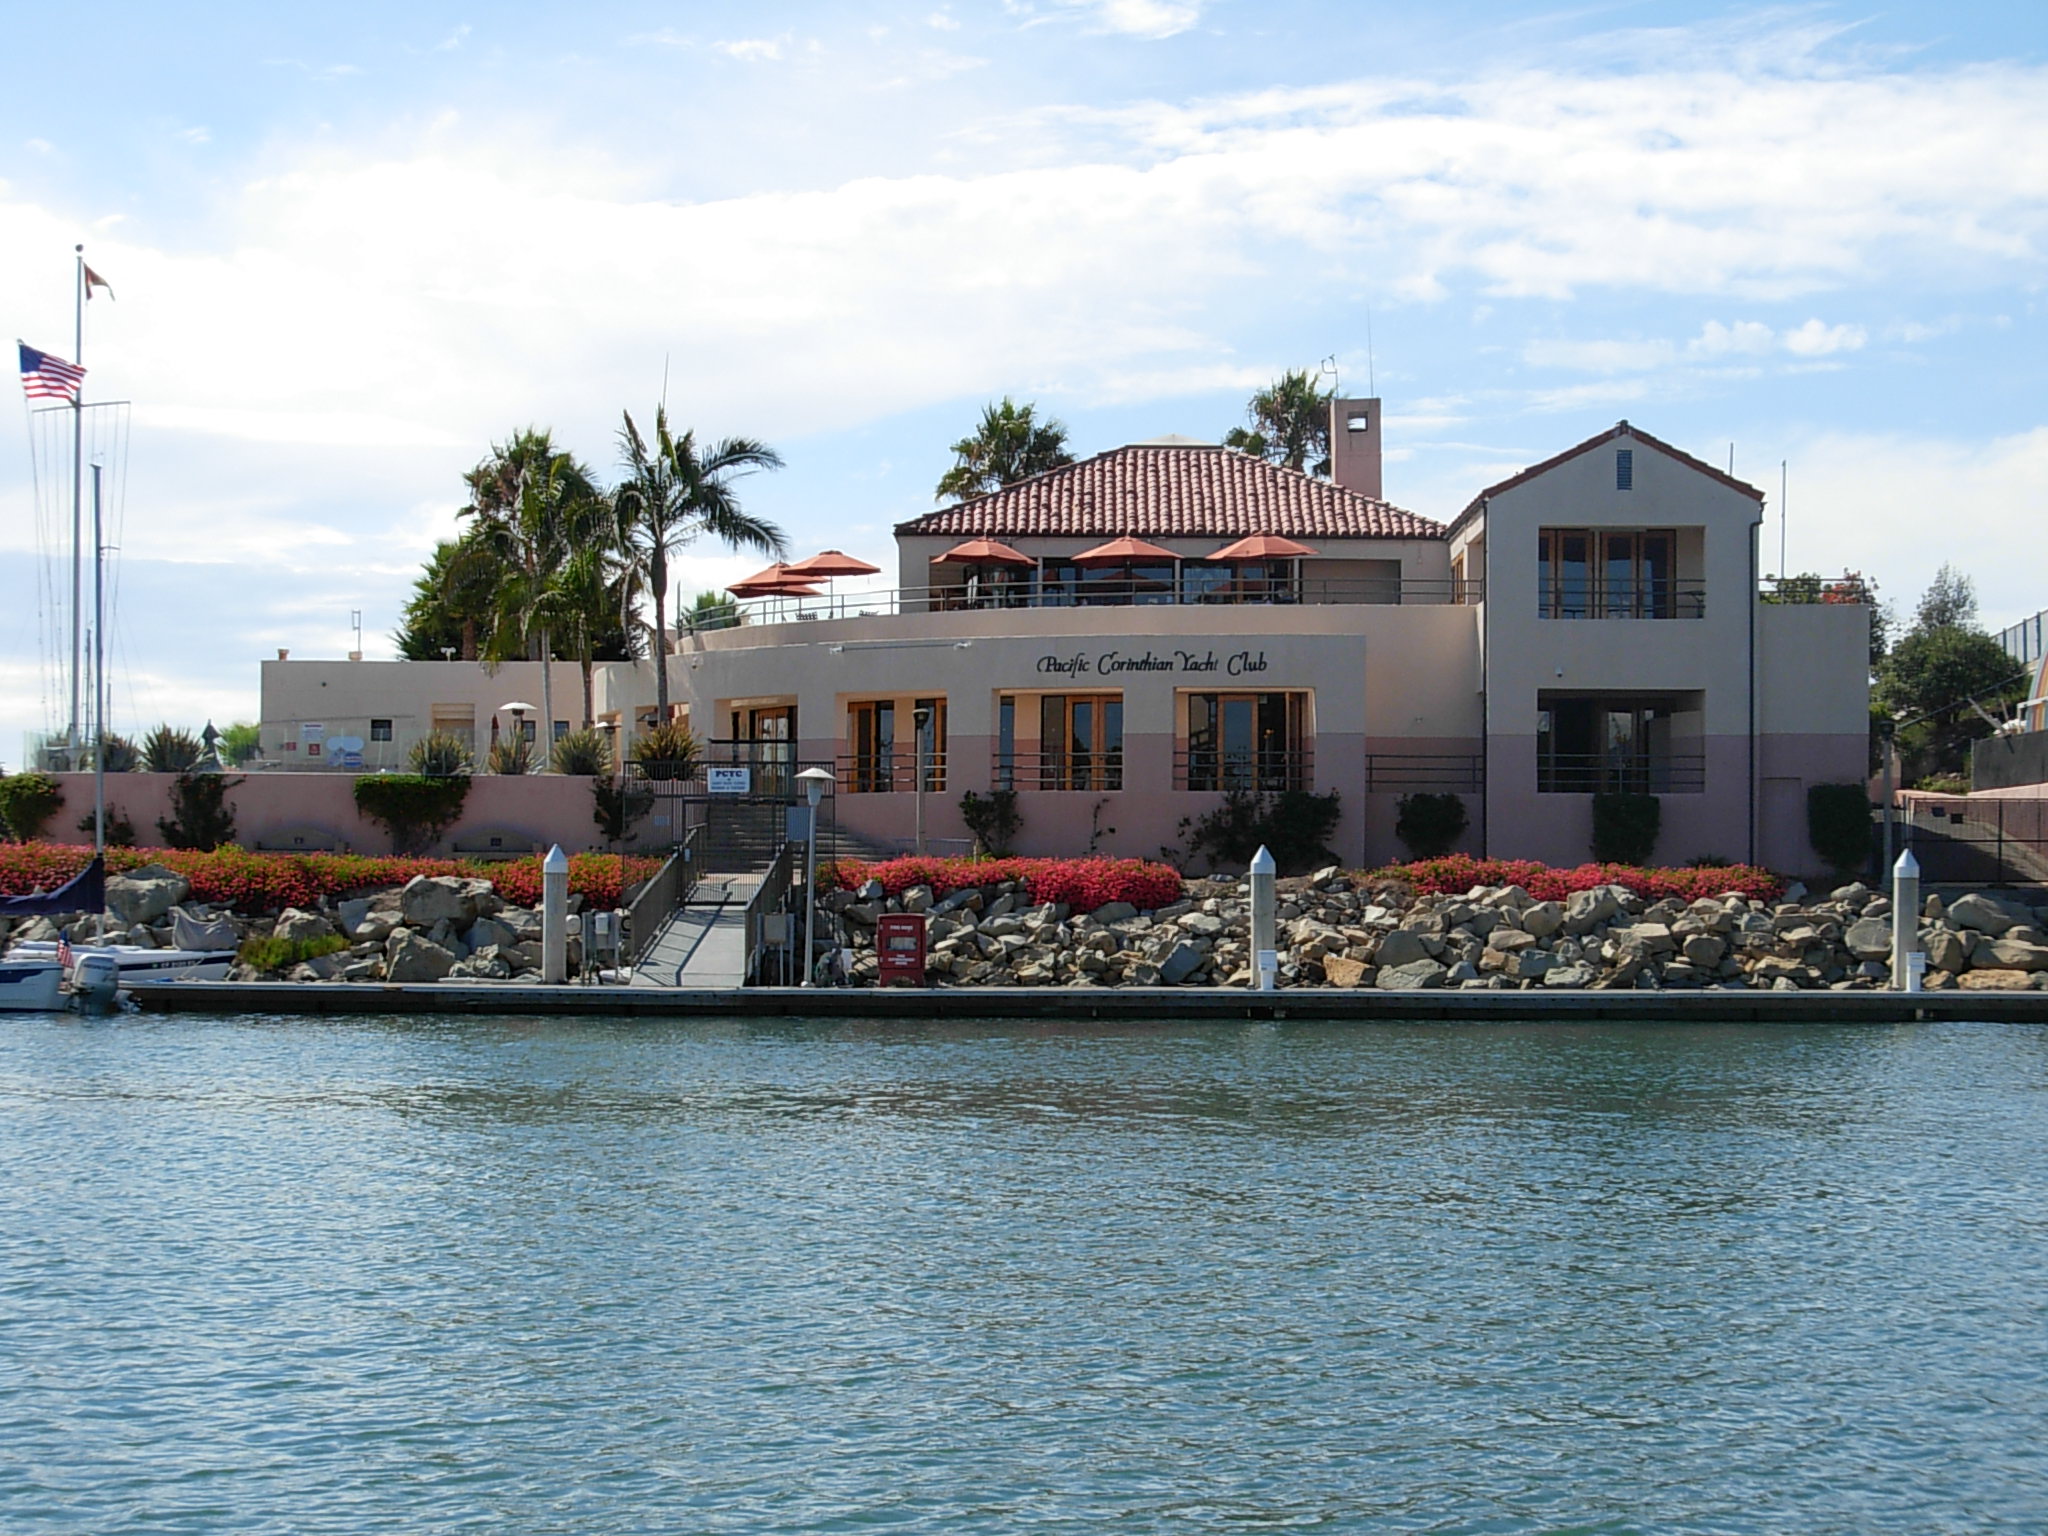 View of the Pacific Corinthian Yacht Club from the water